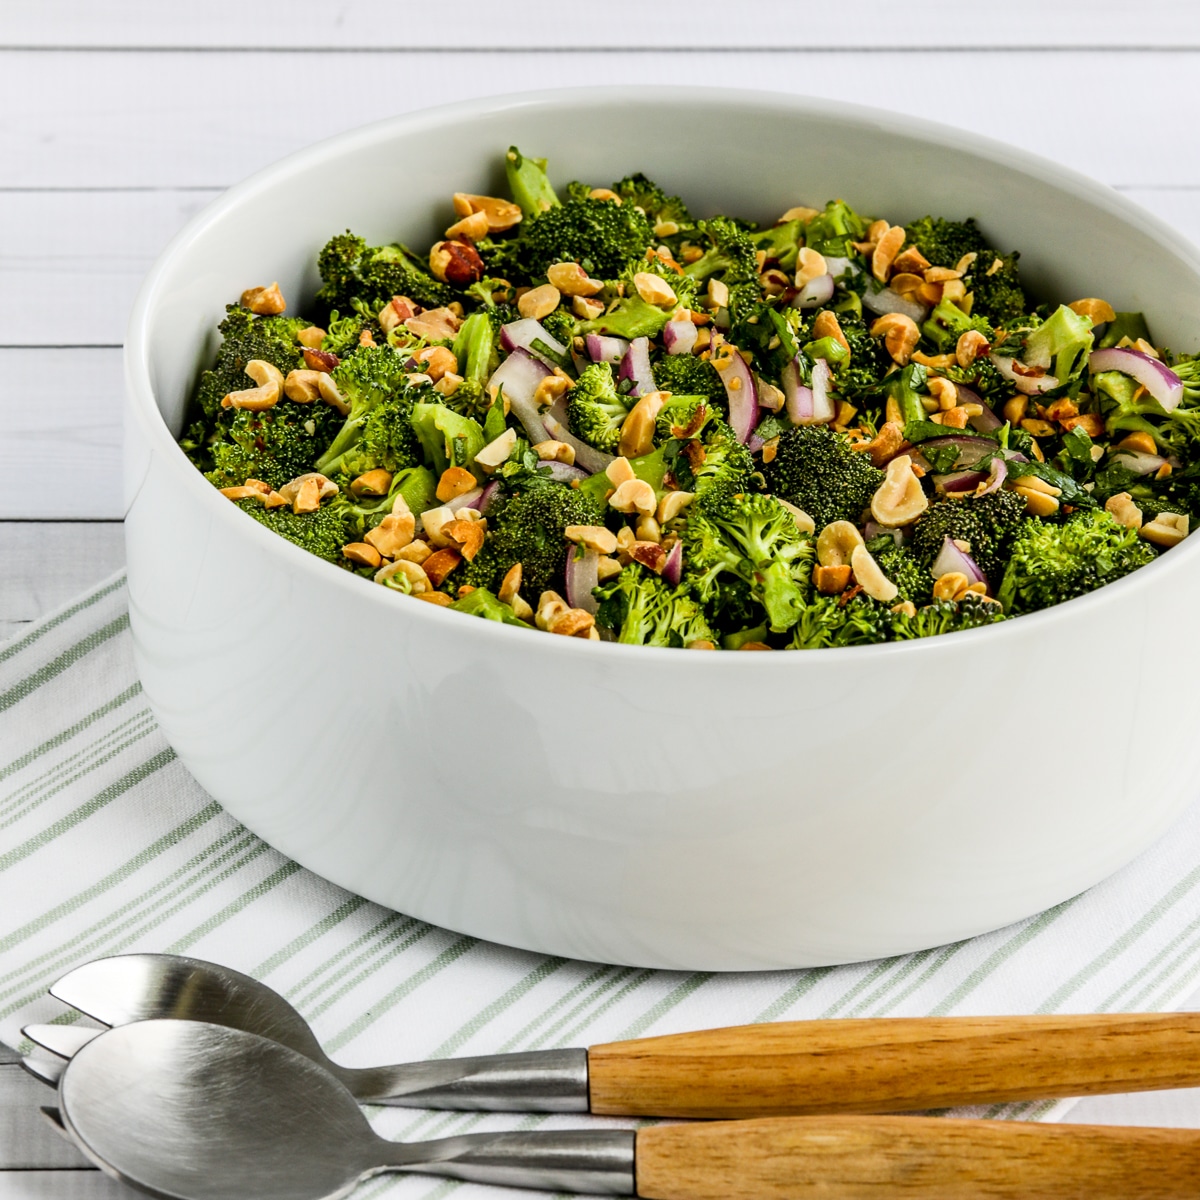 Square image of Broccoli Salad in serving bowl on napkin with fork and spoon for serving.